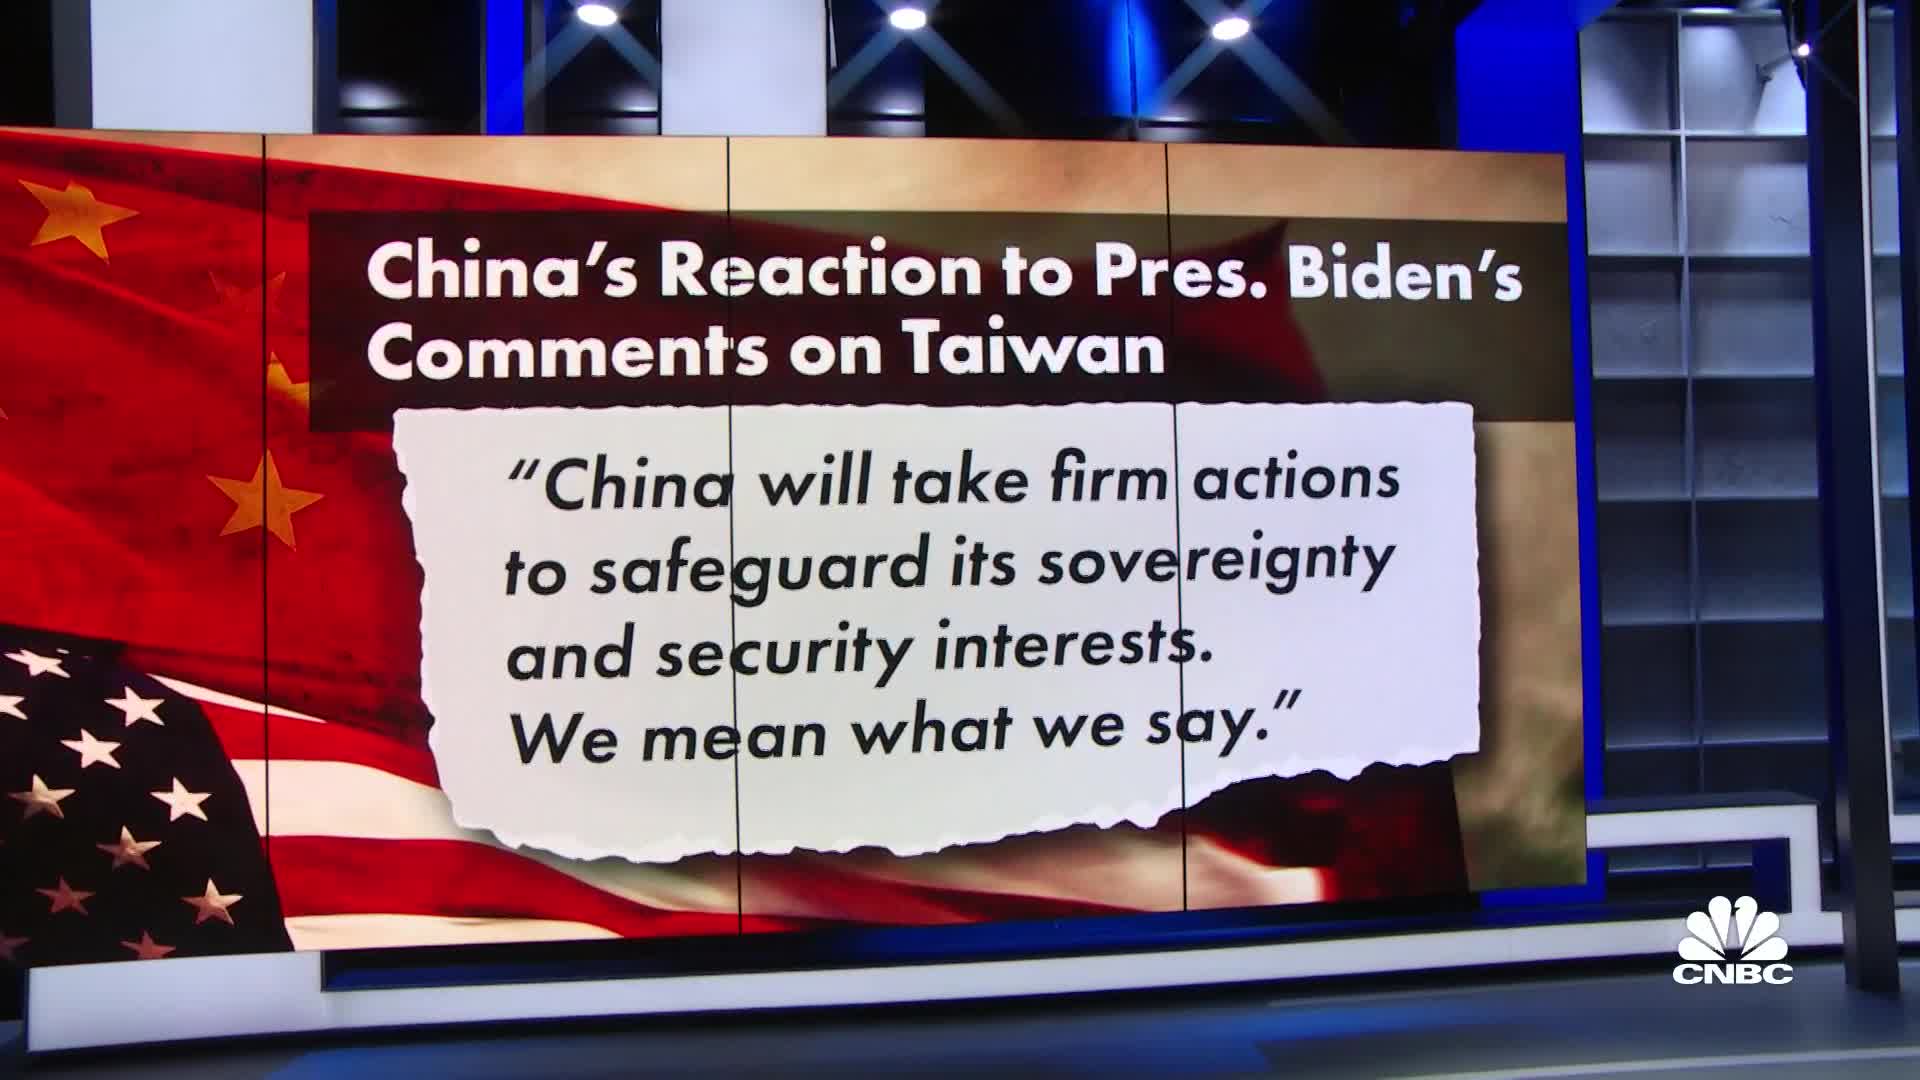 Tensions rise between the U.S. and China after Biden's stern warning over Taiwan